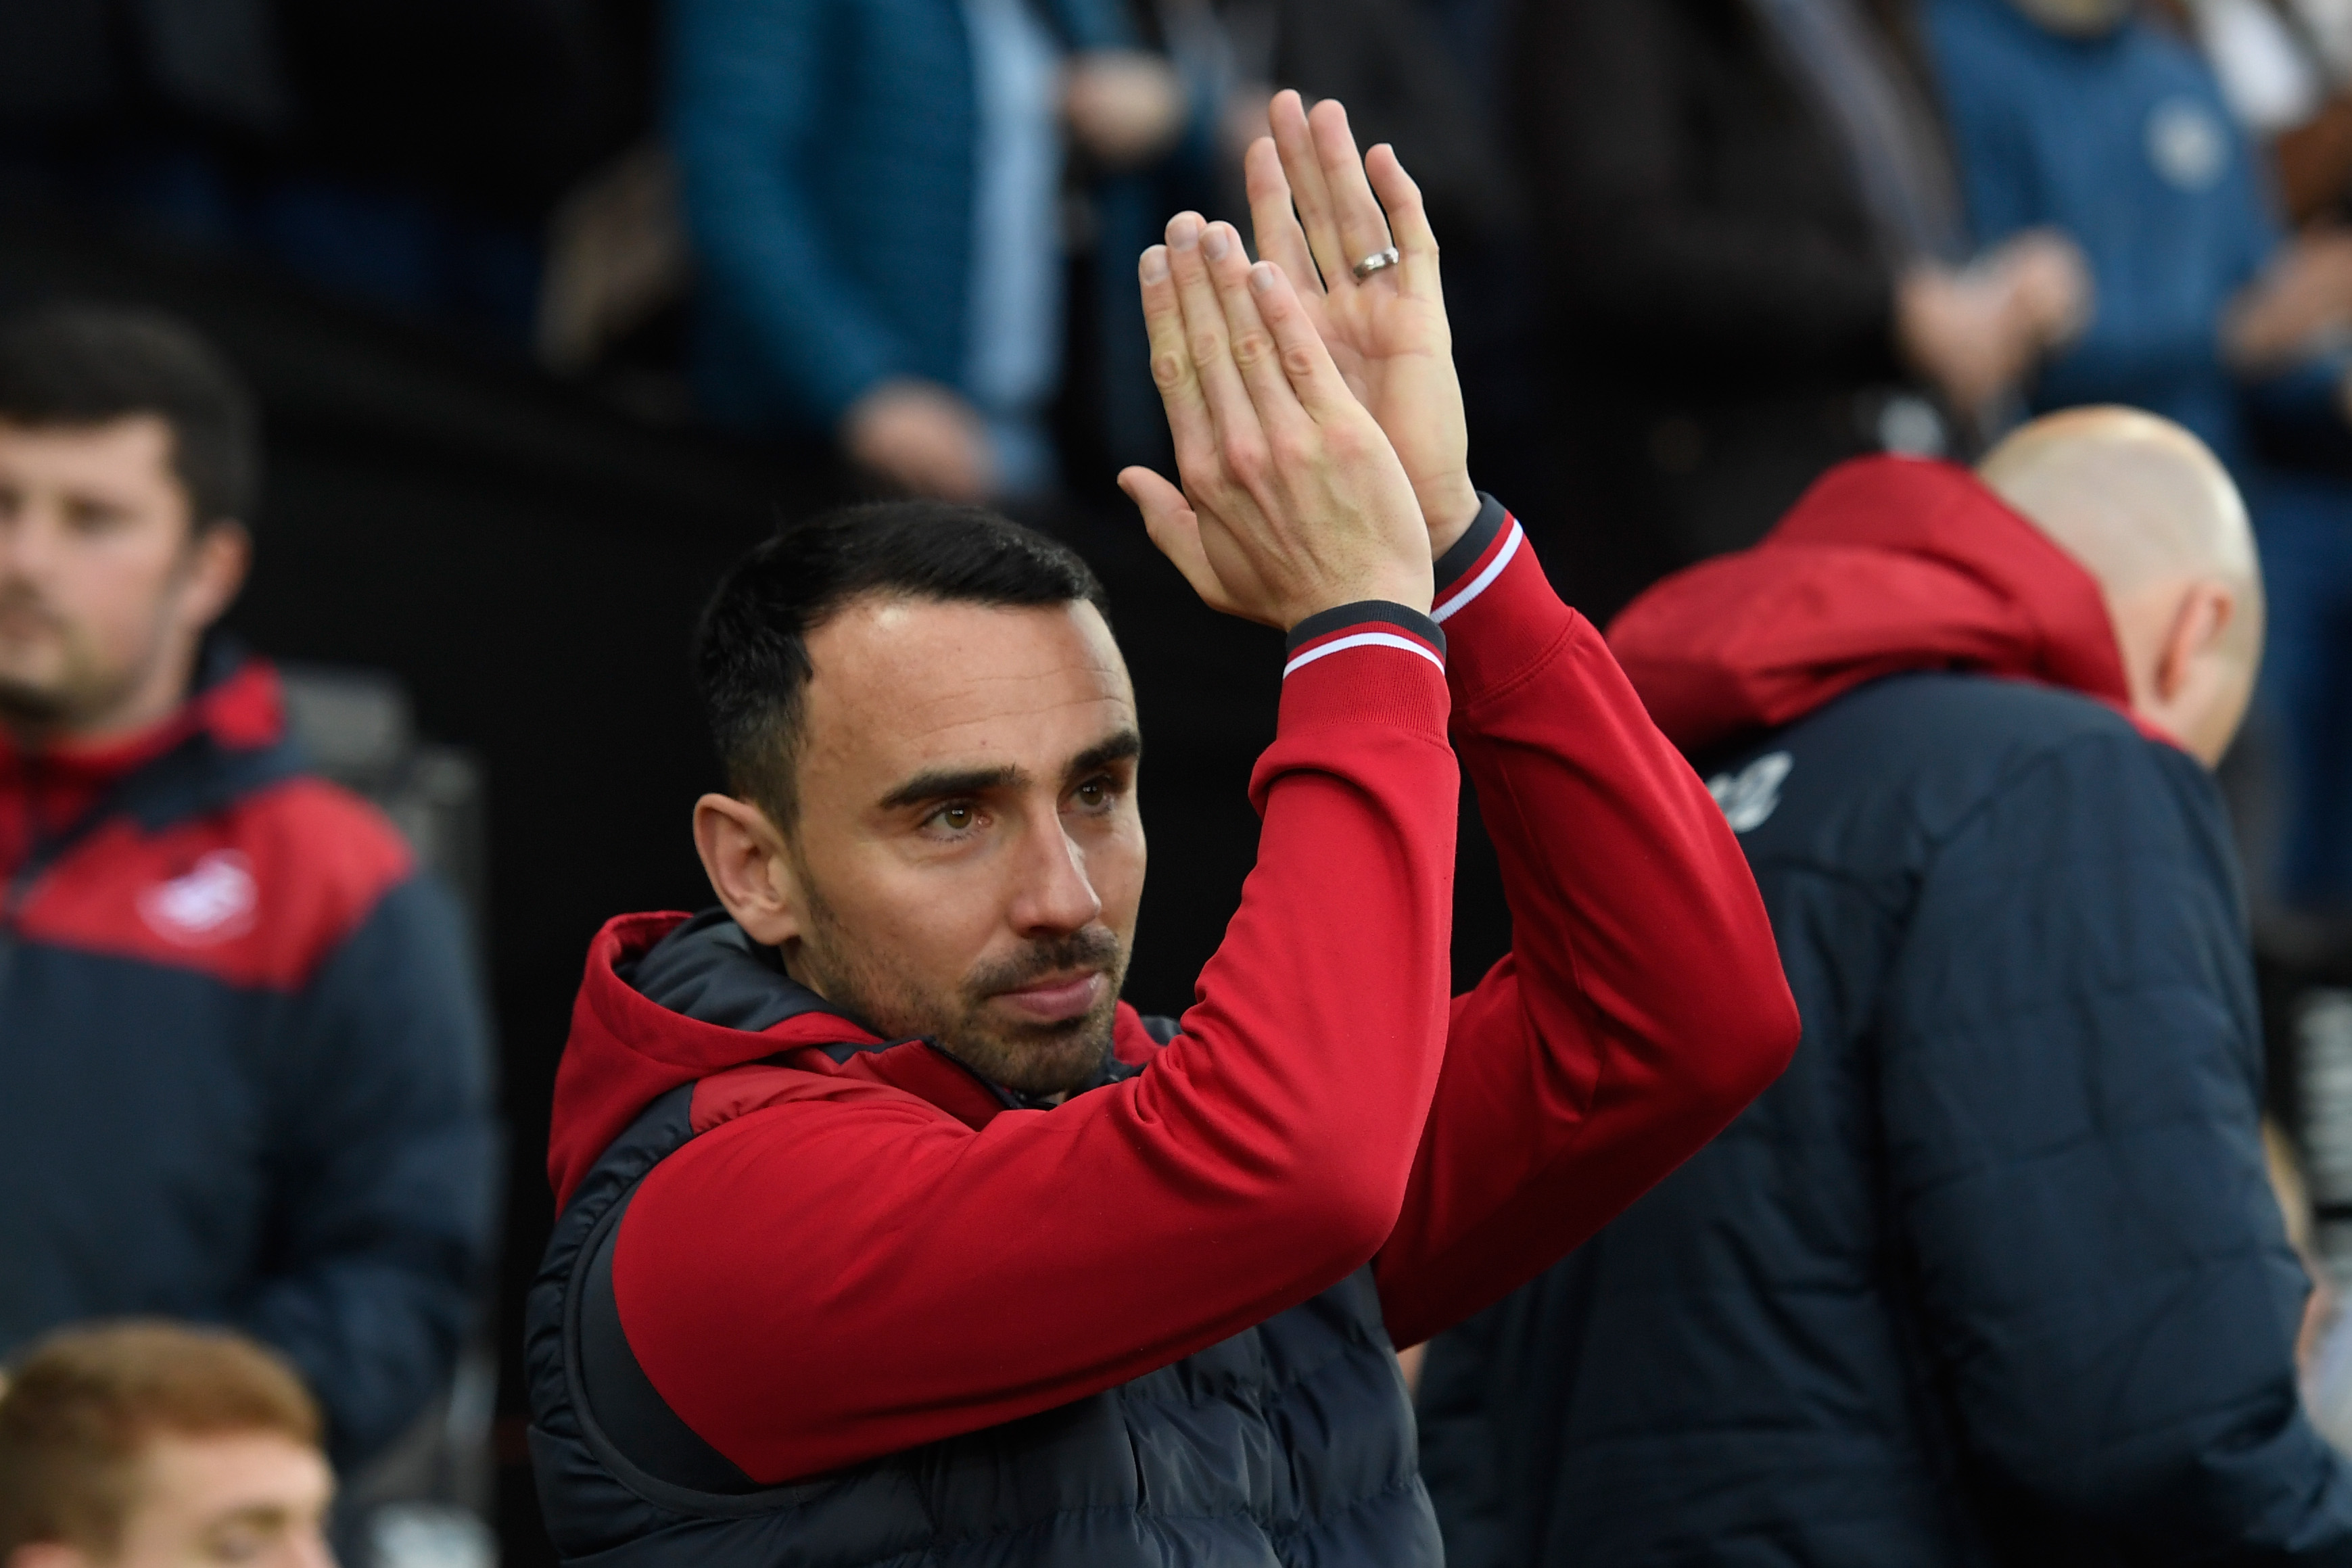 SWANSEA, WALES - DECEMBER 23:  Leon Britton, Caretaker manager Player/Manager of Swansea City applauds fans prior to the Premier League match between Swansea City and Crystal Palace at Liberty Stadium on December 23, 2017 in Swansea, Wales.  (Photo by Stu Forster/Getty Images)